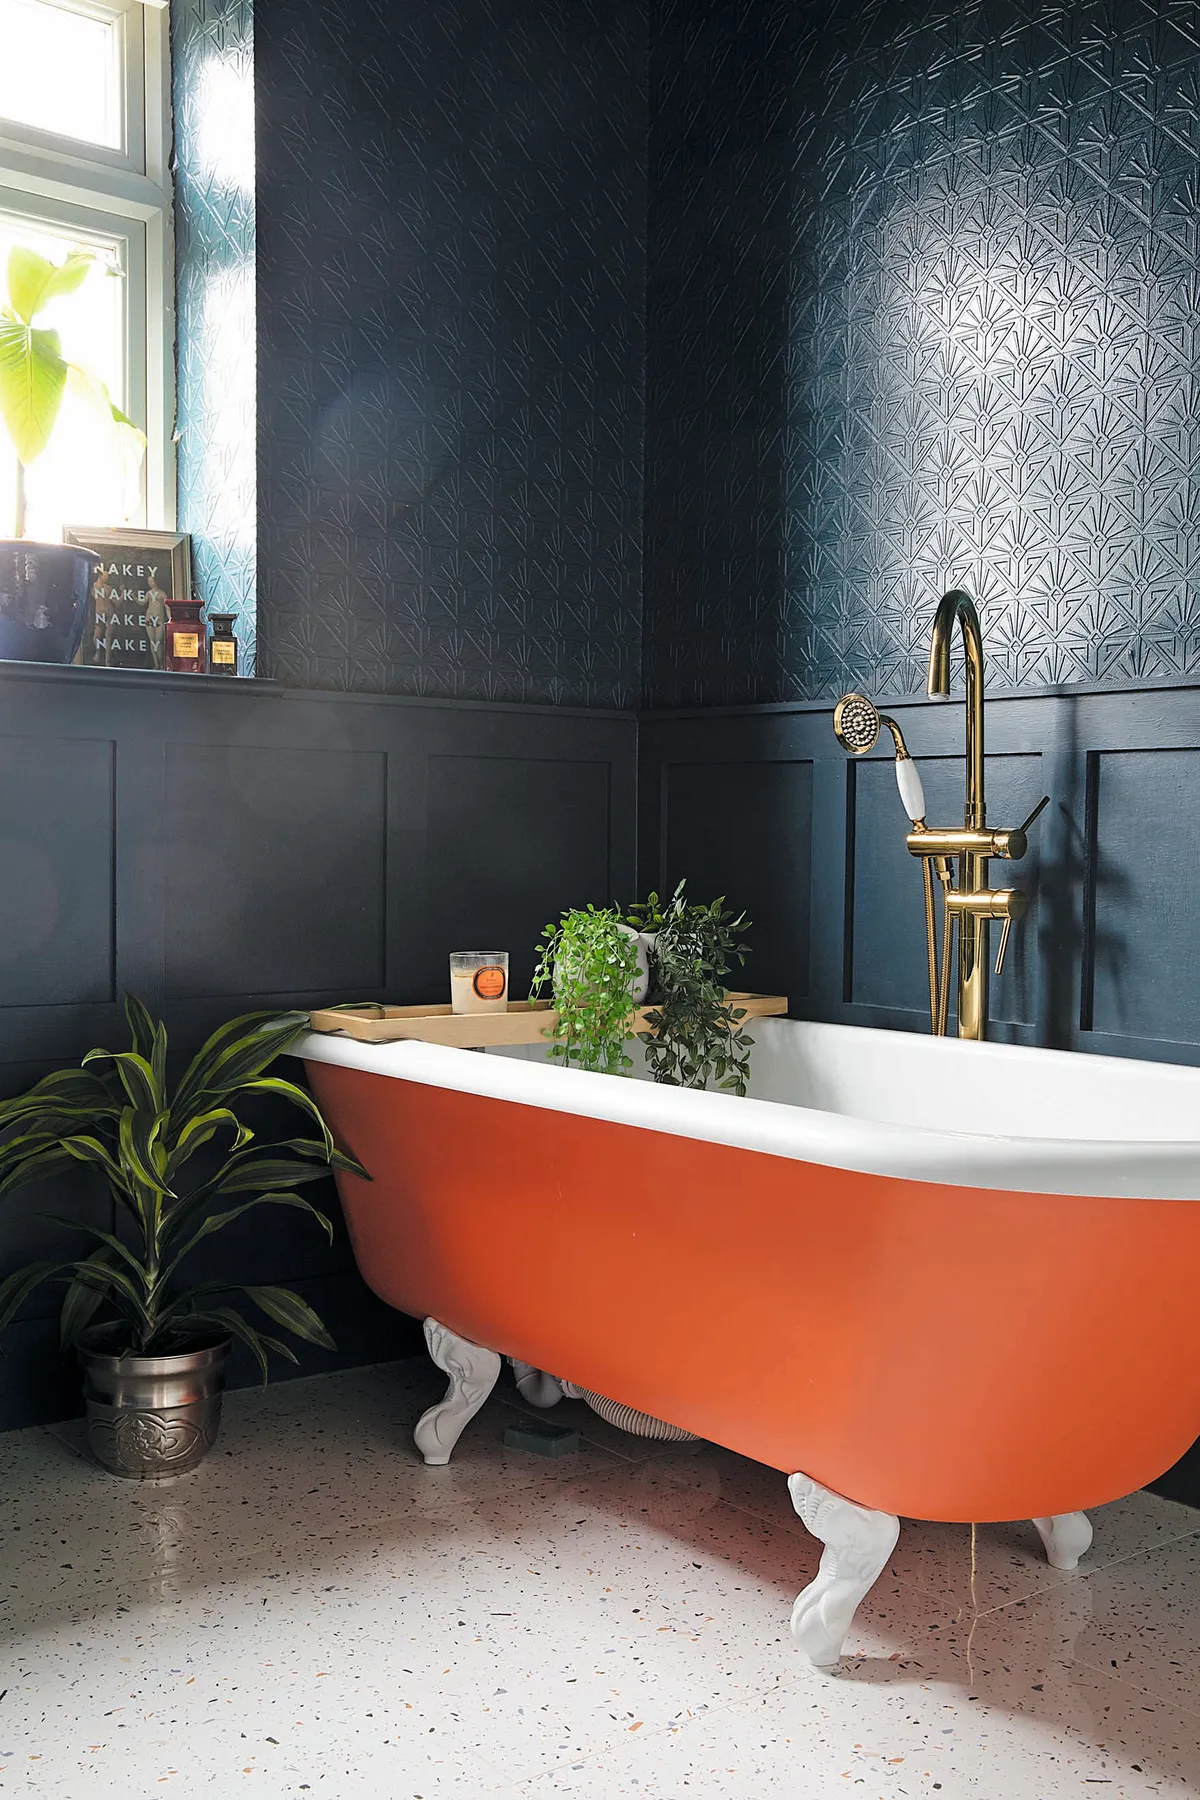 Rachel has created a dramatic bathroom with Farrow & Ball’s Hague Blue on the walls and Charlotte’s Locks on the free-standing bath